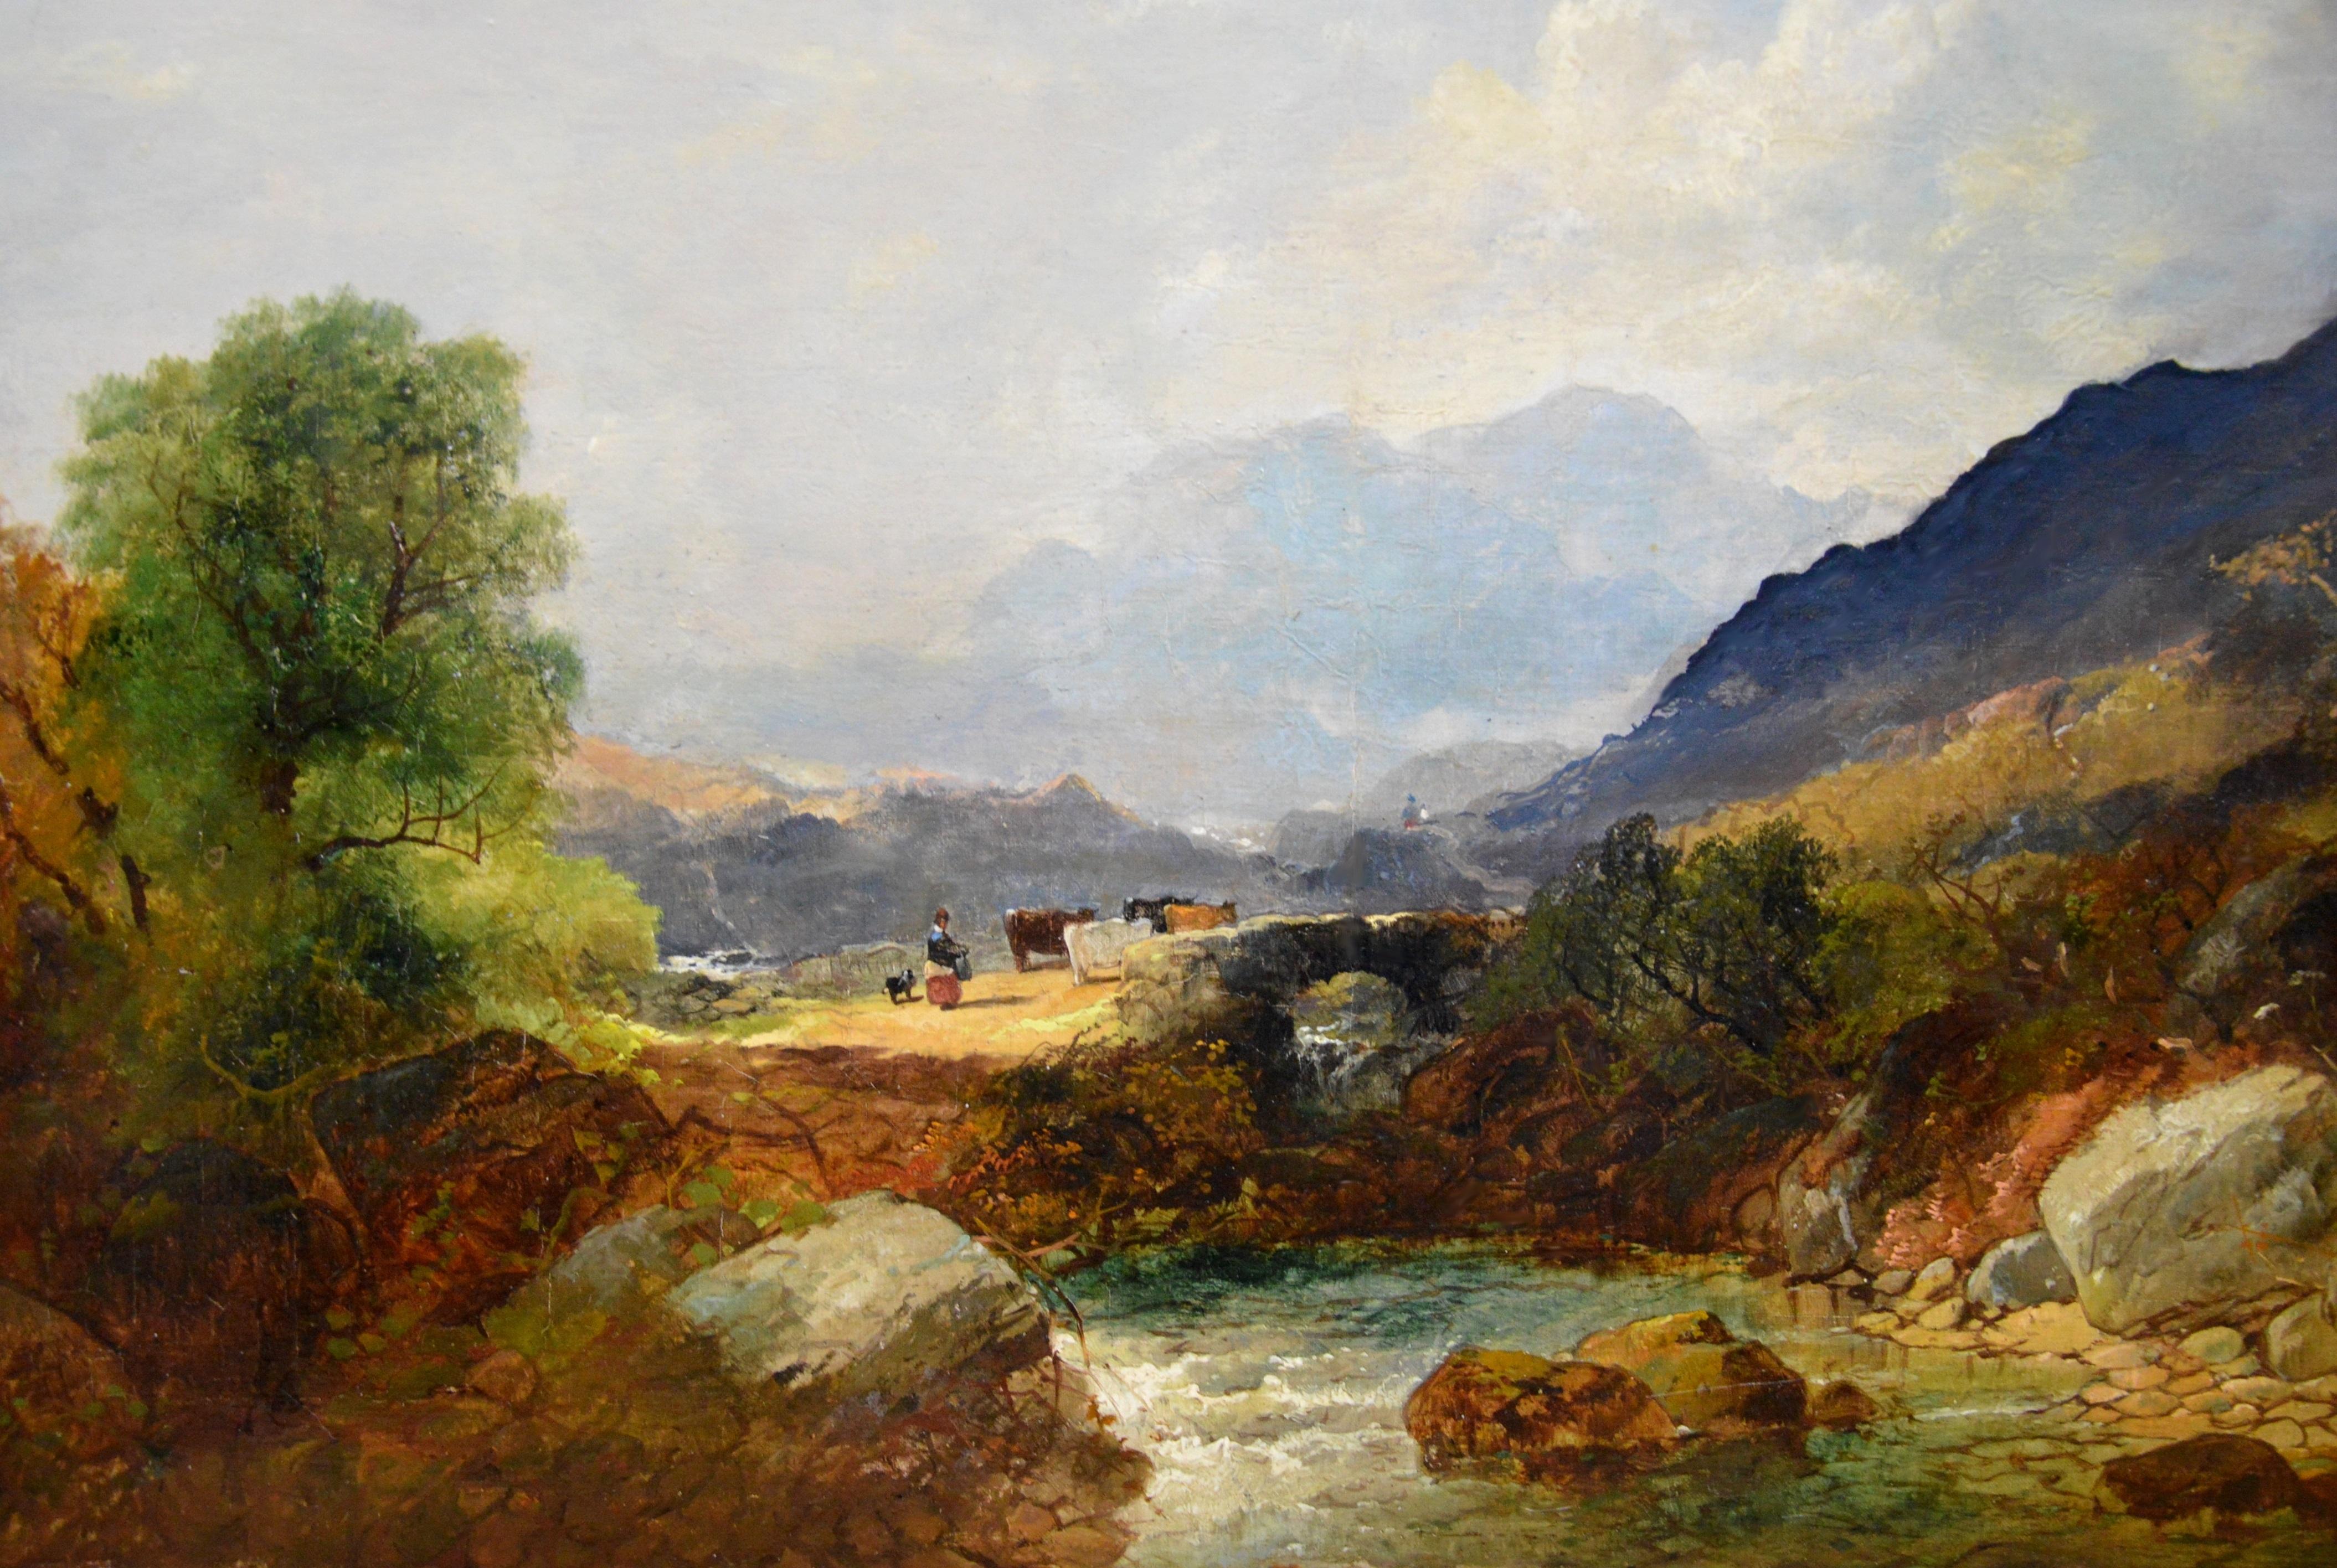 Snowdon, North Wales - Very Large 19th Century Oil Painting - Mount Snowdon - Brown Animal Painting by Joseph Horlor